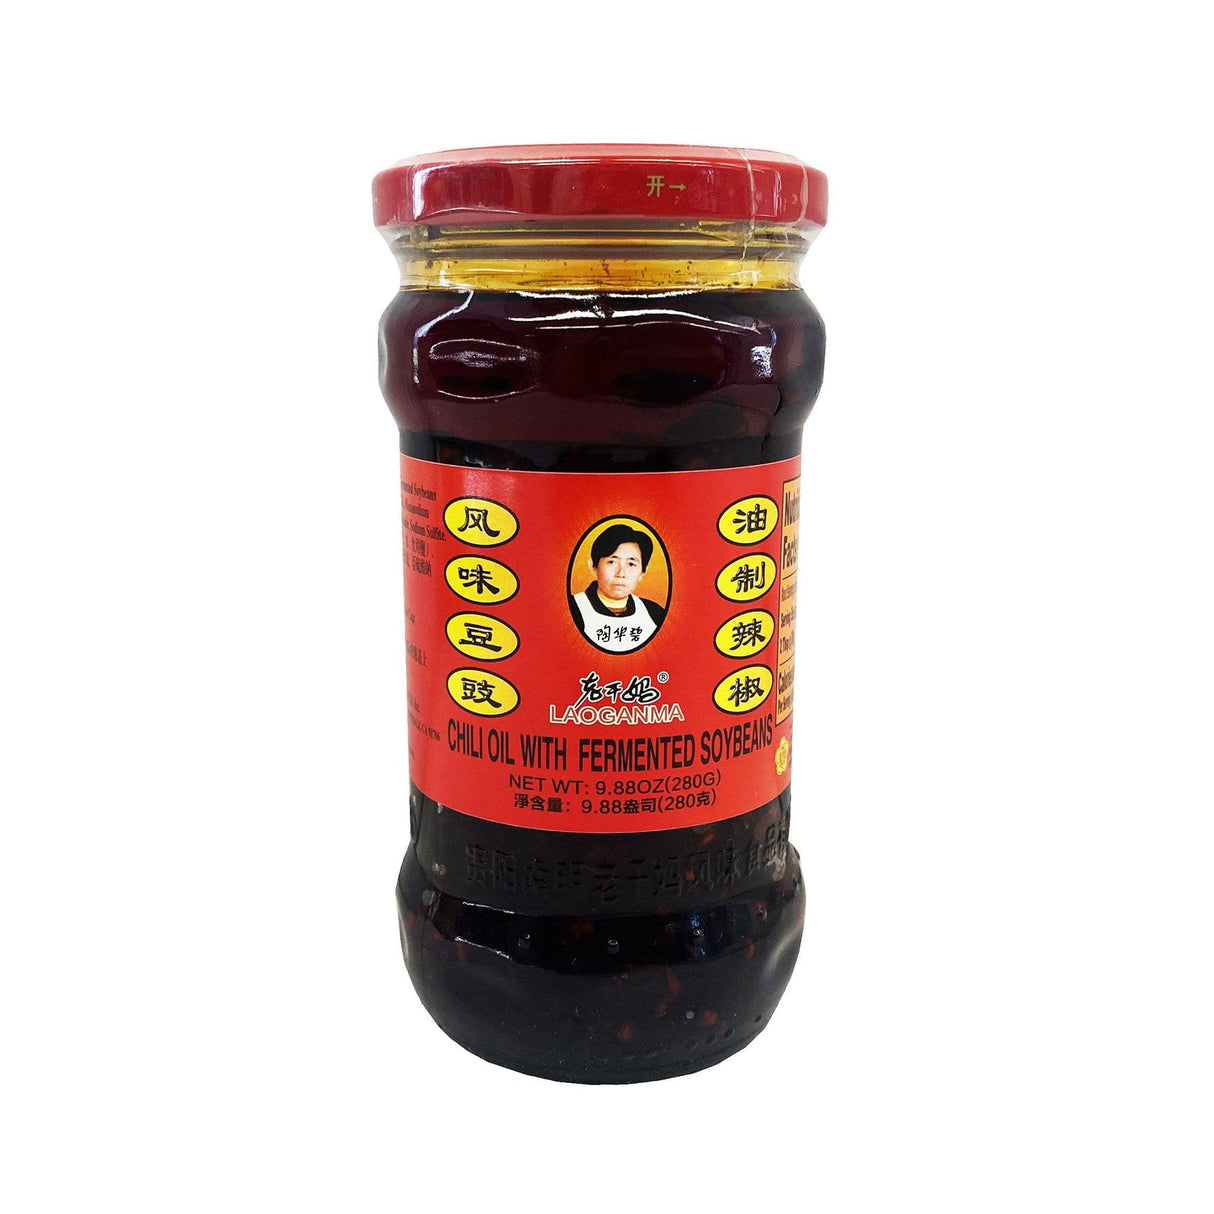 Laoganma Chili Oil with Fermented Soybeans